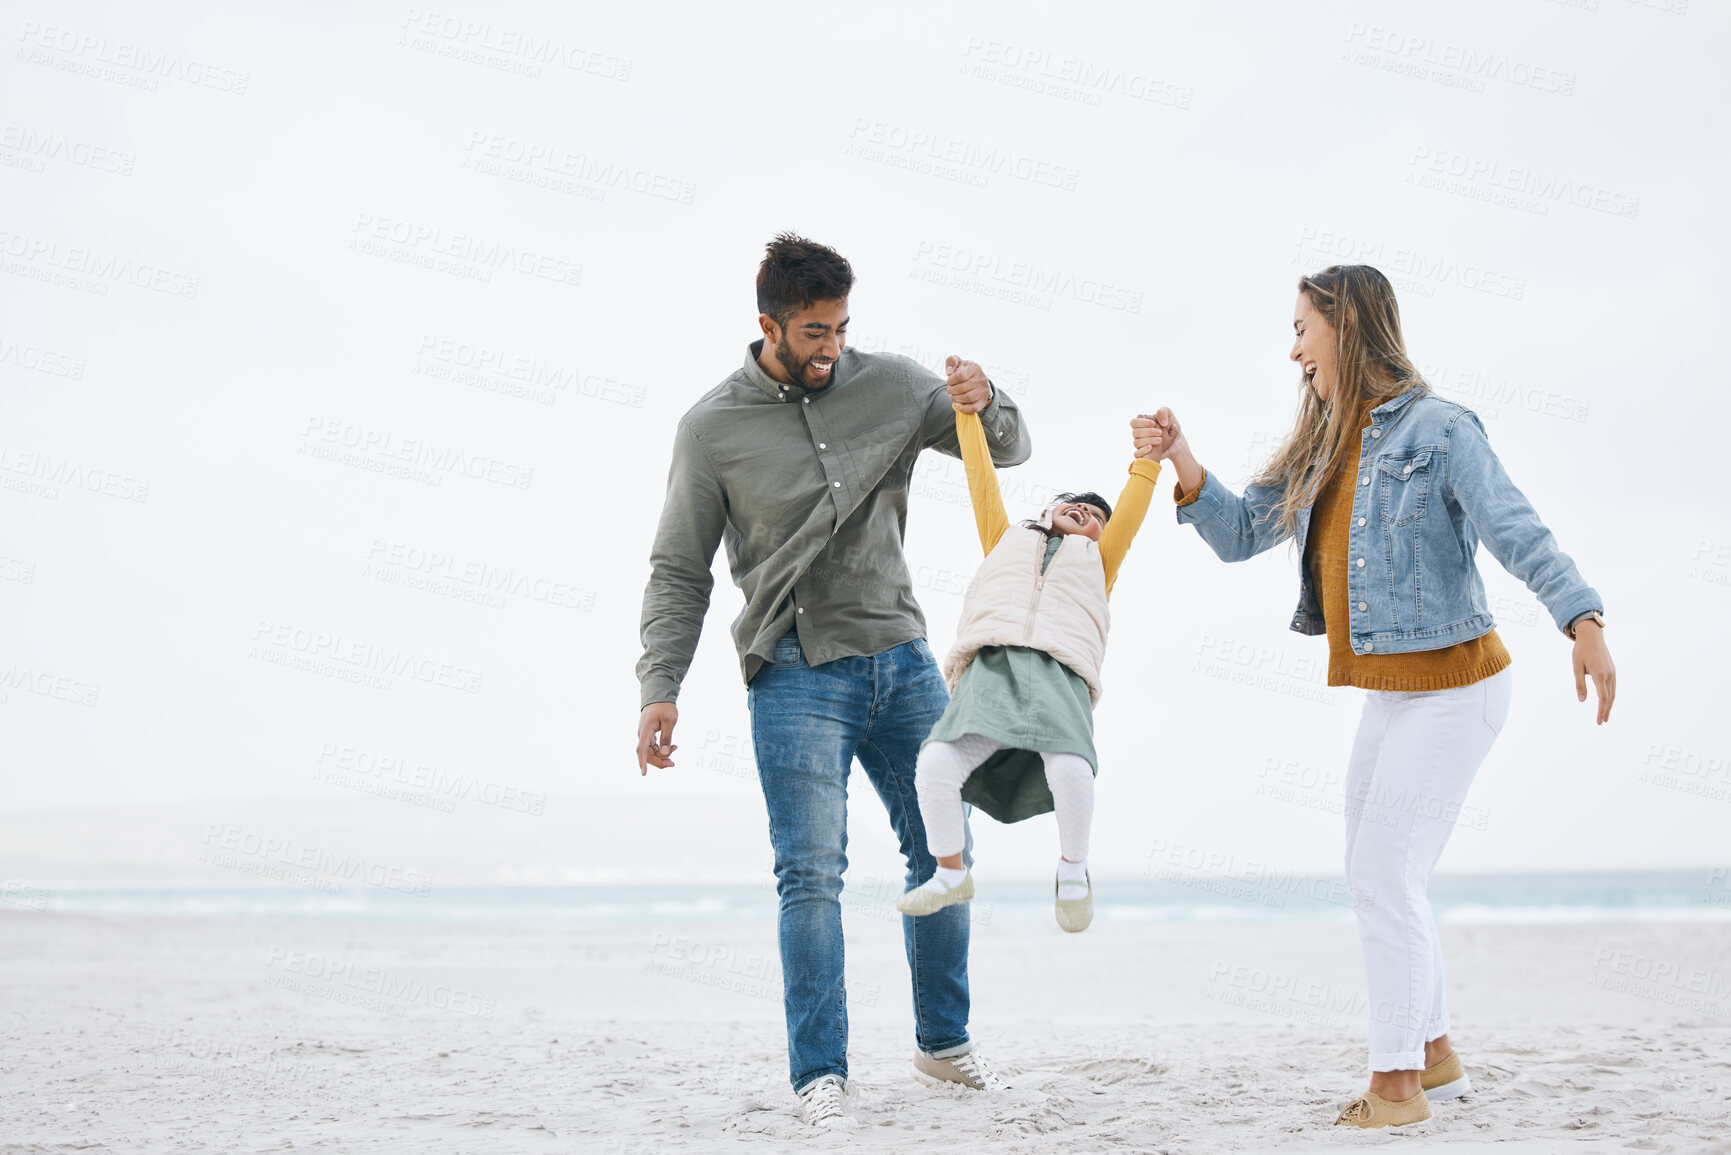 Buy stock photo Swinging, holding hands and a family at the beach for walking, bonding or playing together. Happy, playful and a mother, father and boy kid at the ocean for a holiday, relax and love during travel